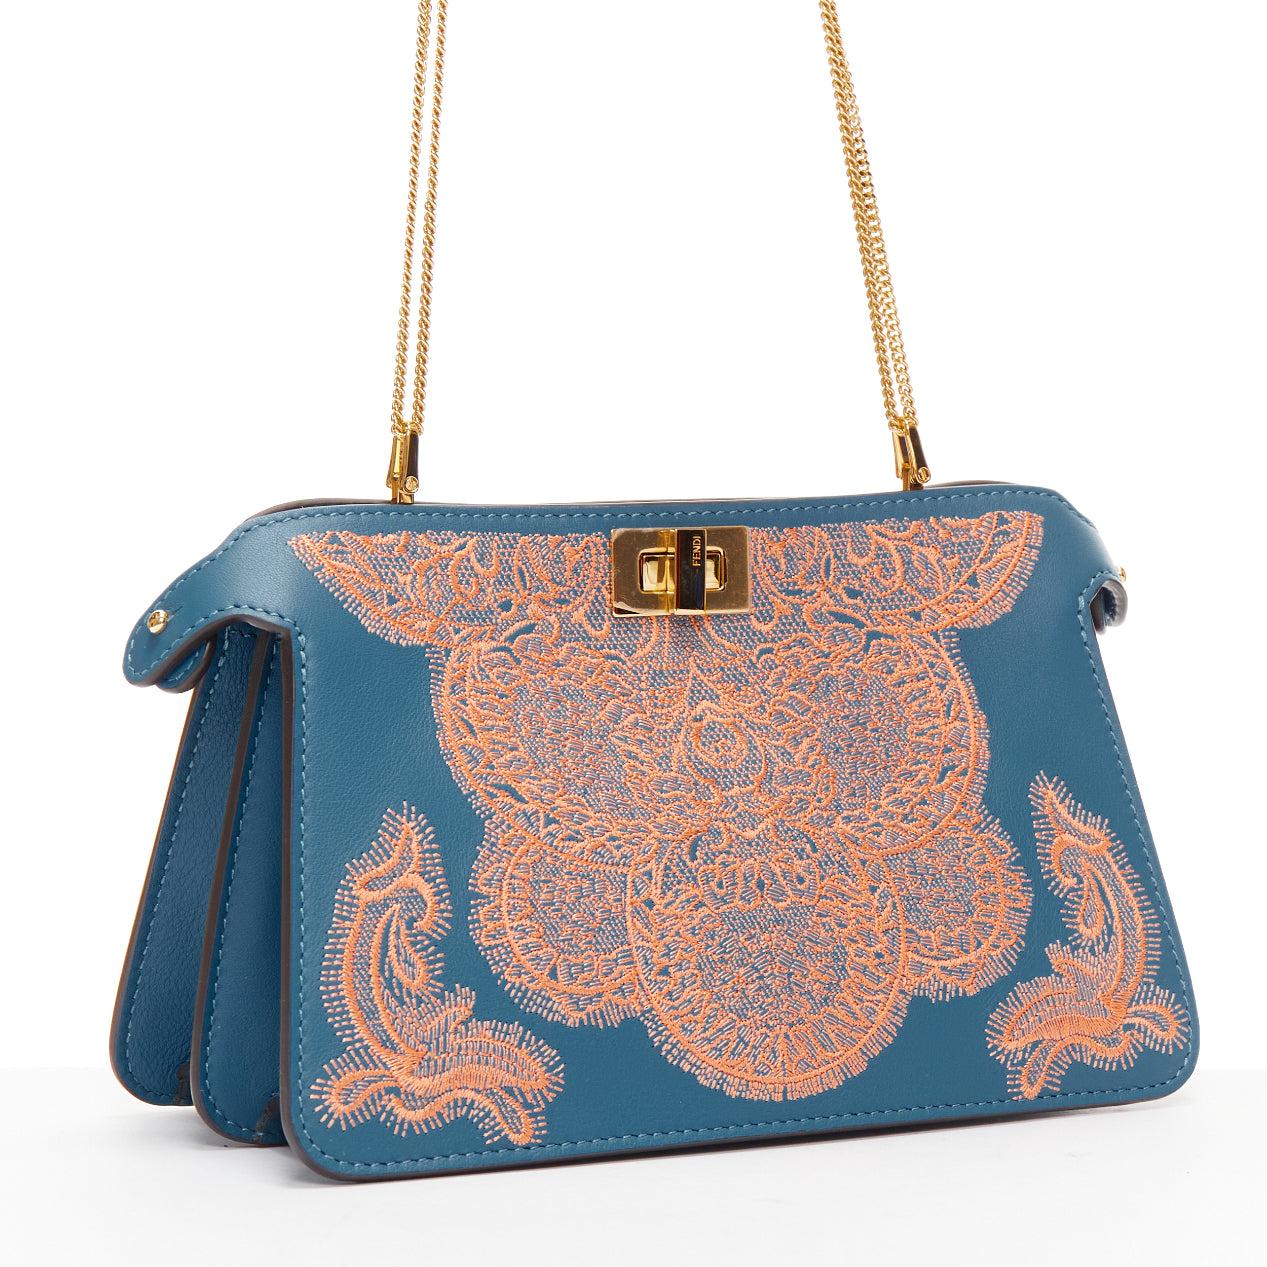 FENDI Peekaboo pink lace applique blue leather gold buckle crossbody bag In Excellent Condition For Sale In Hong Kong, NT